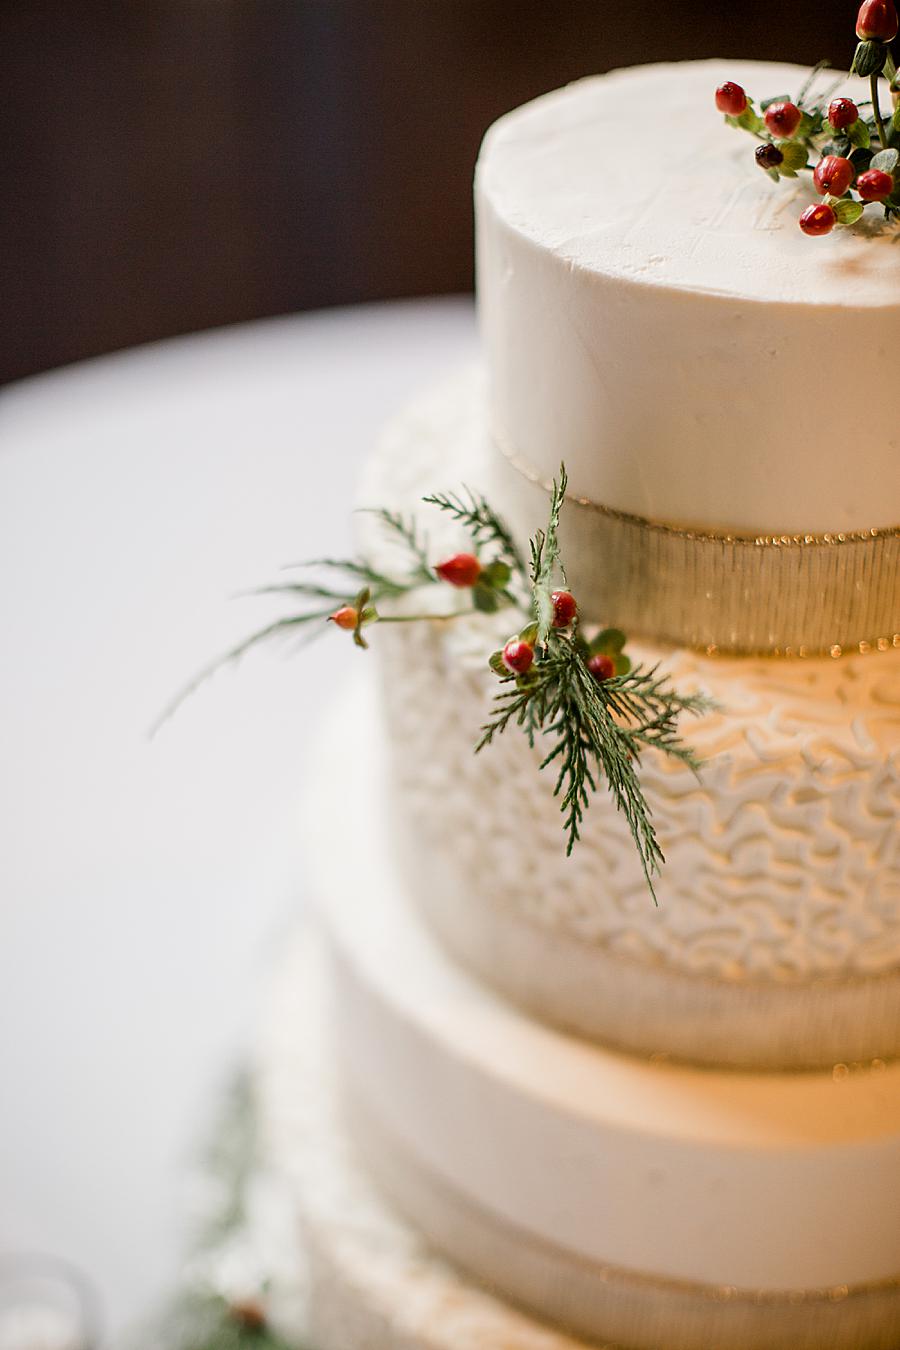 The cake at this The Foundry Wedding by Knoxville Wedding Photographer, Amanda May Photos.